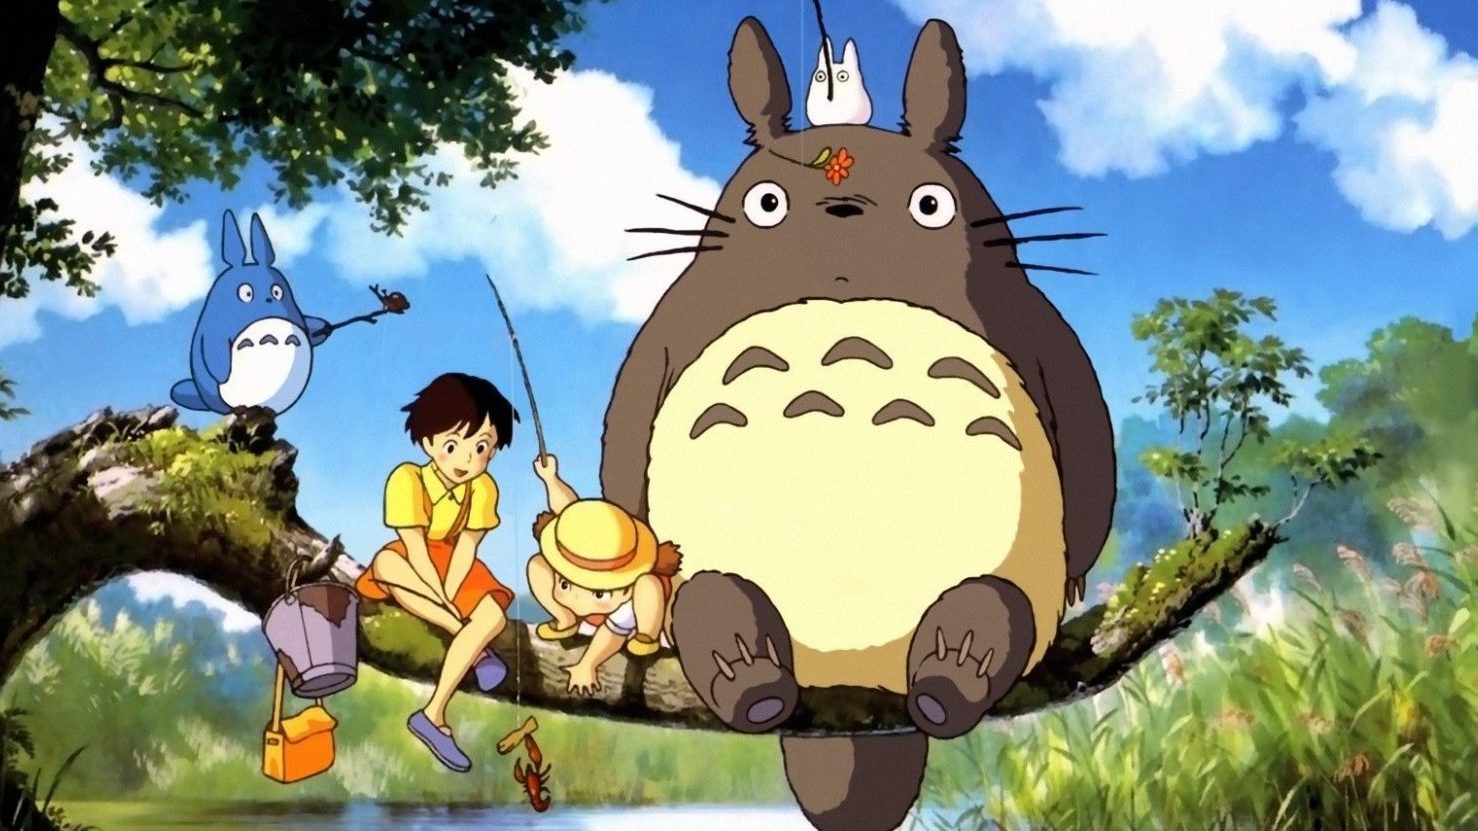 The Inspirational Message of Studio Ghibli's Films: Finding Hope in the Face of Adversity